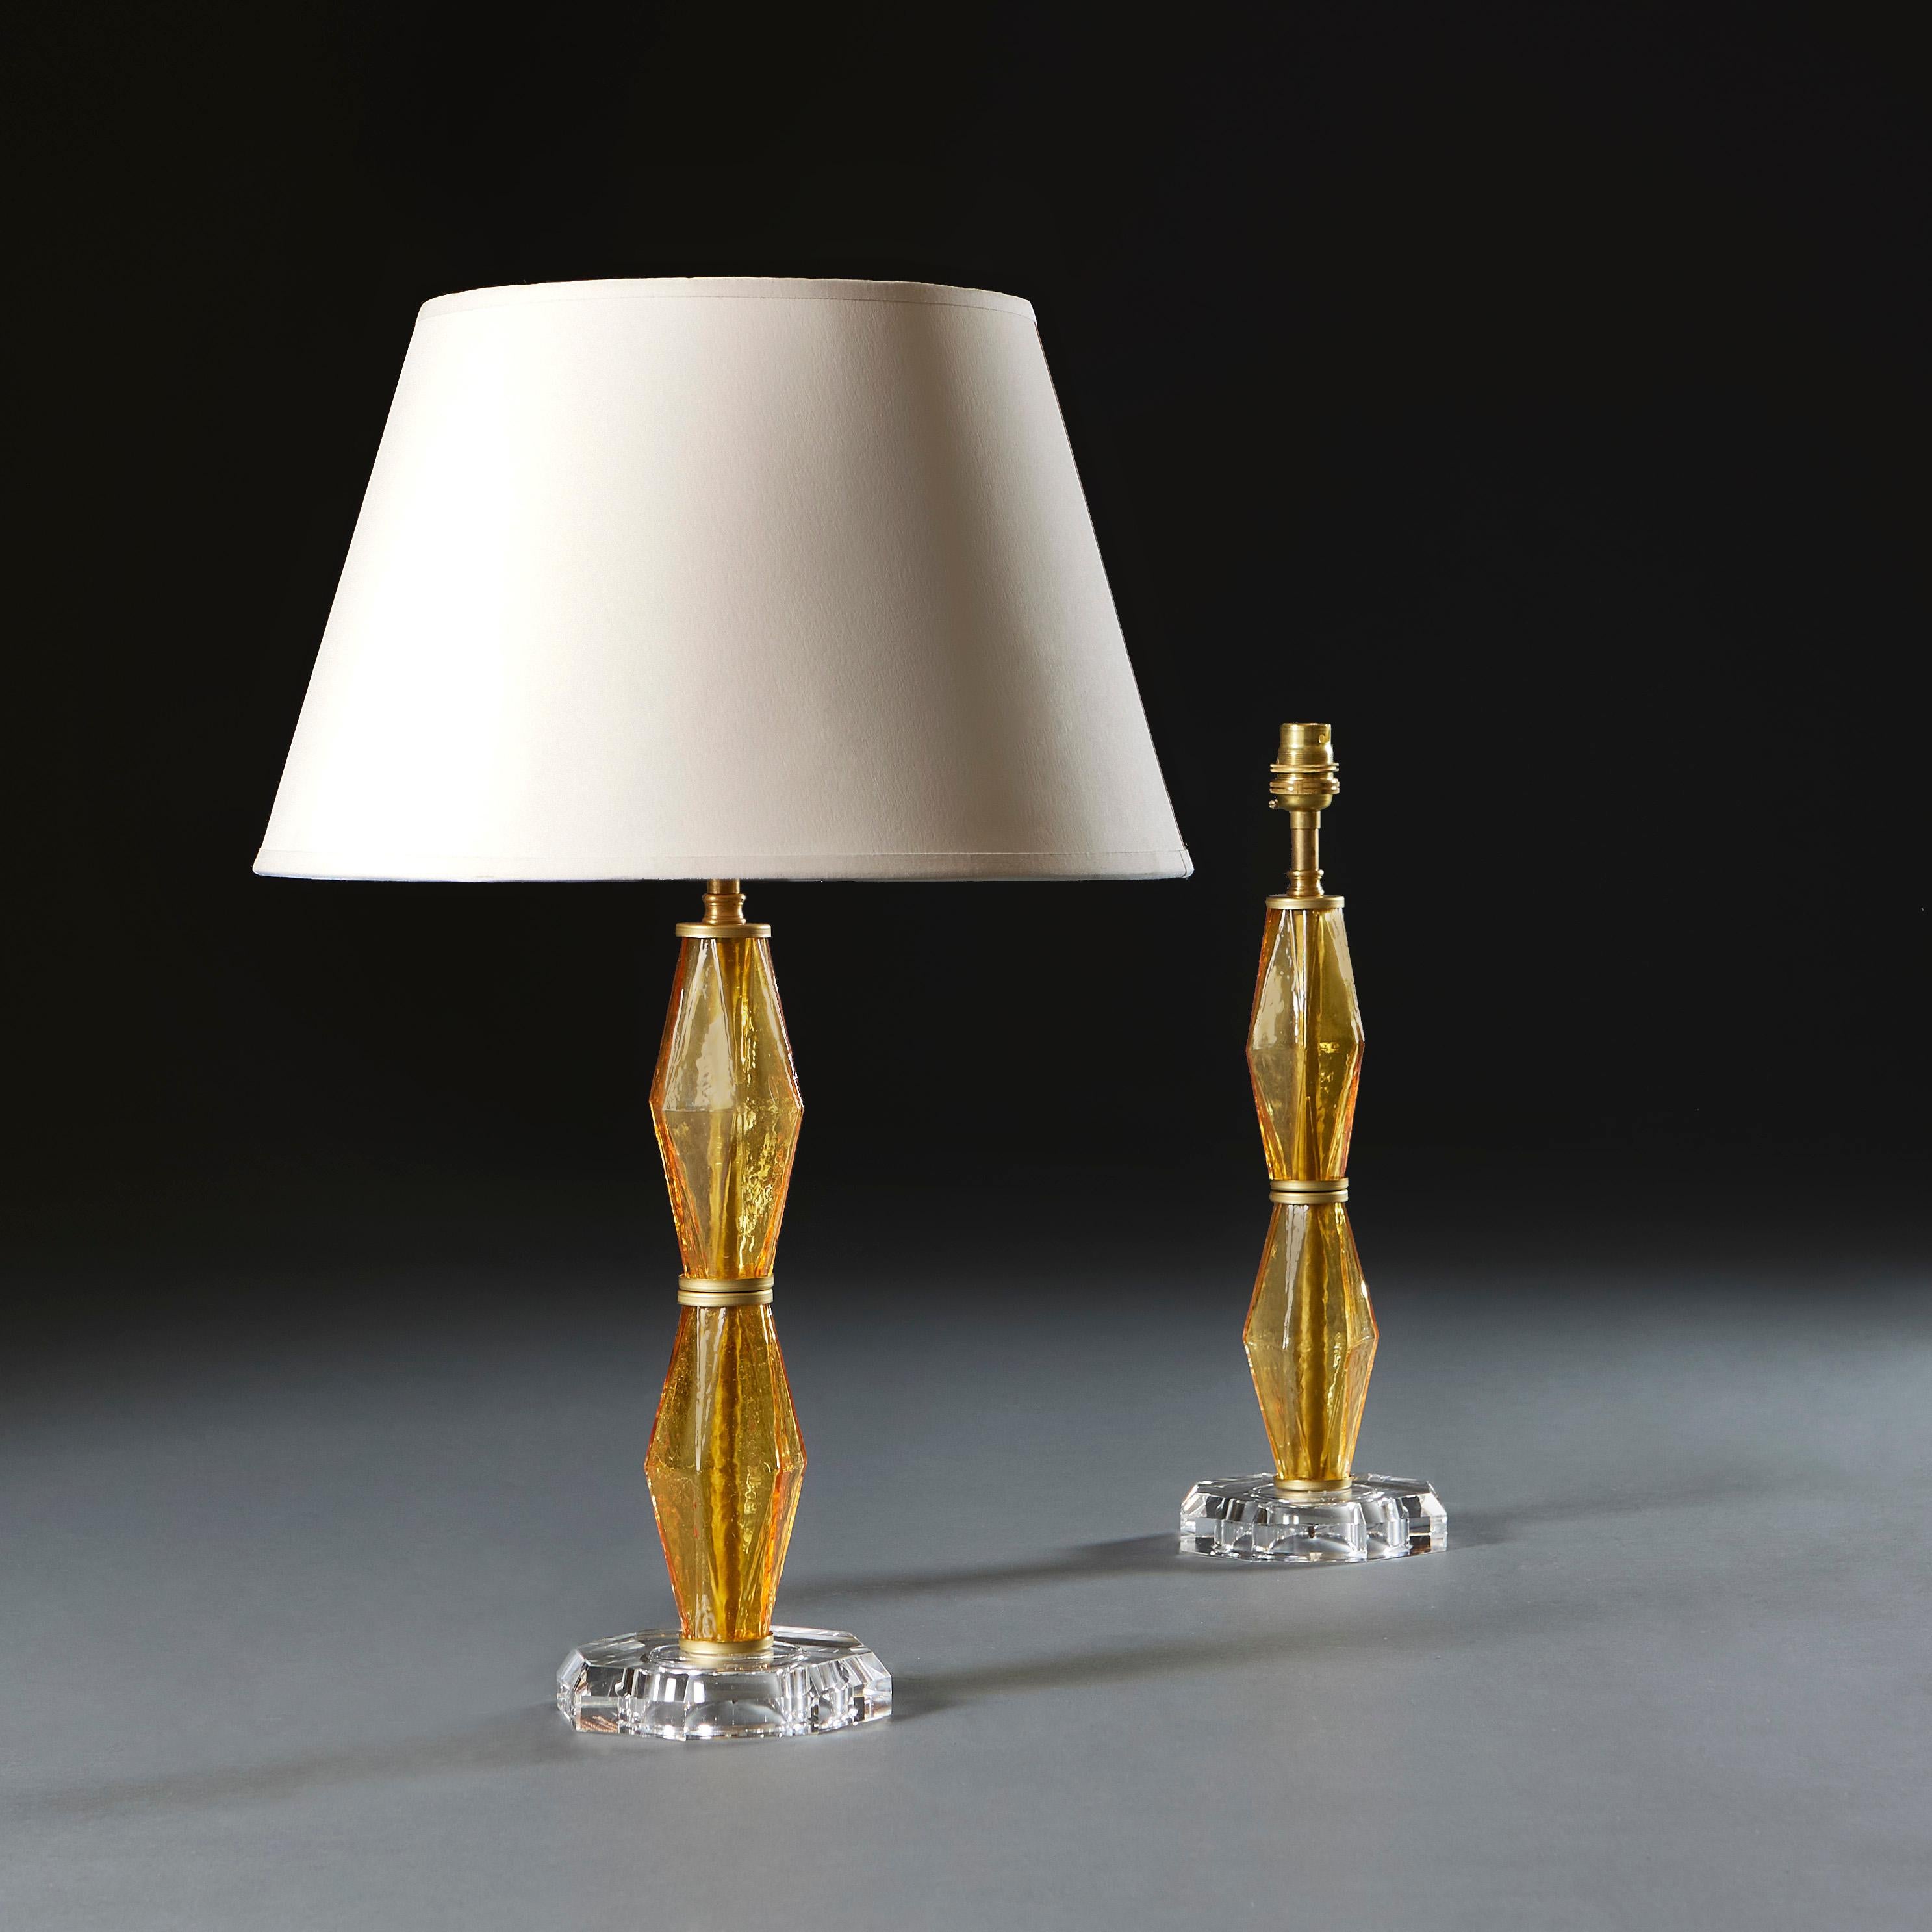 Italy, circa 1940

A pair of unusual amber glass lamps with diamond formation to the stem, supported on a clear glass octagonal base. After Carlo Scarpa.

Height 31.00cm
Height with shade 56.00cm
Diameter of base 12.00cm.

Please note: This is